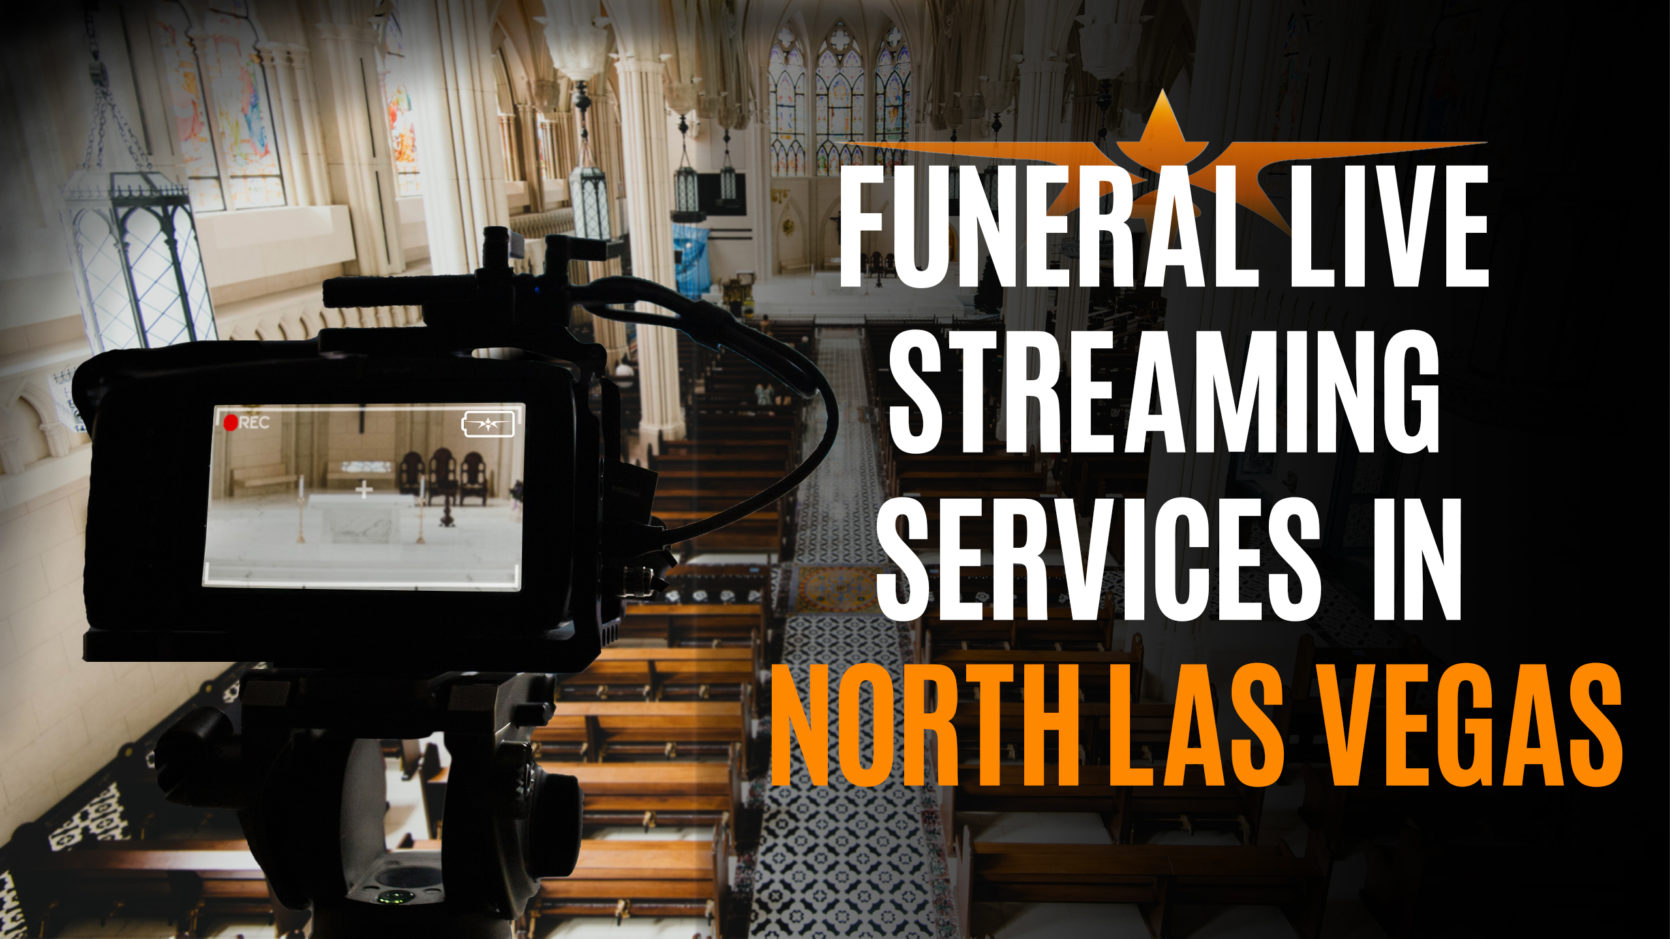 Funeral Live Streaming Services in North Las Vegas